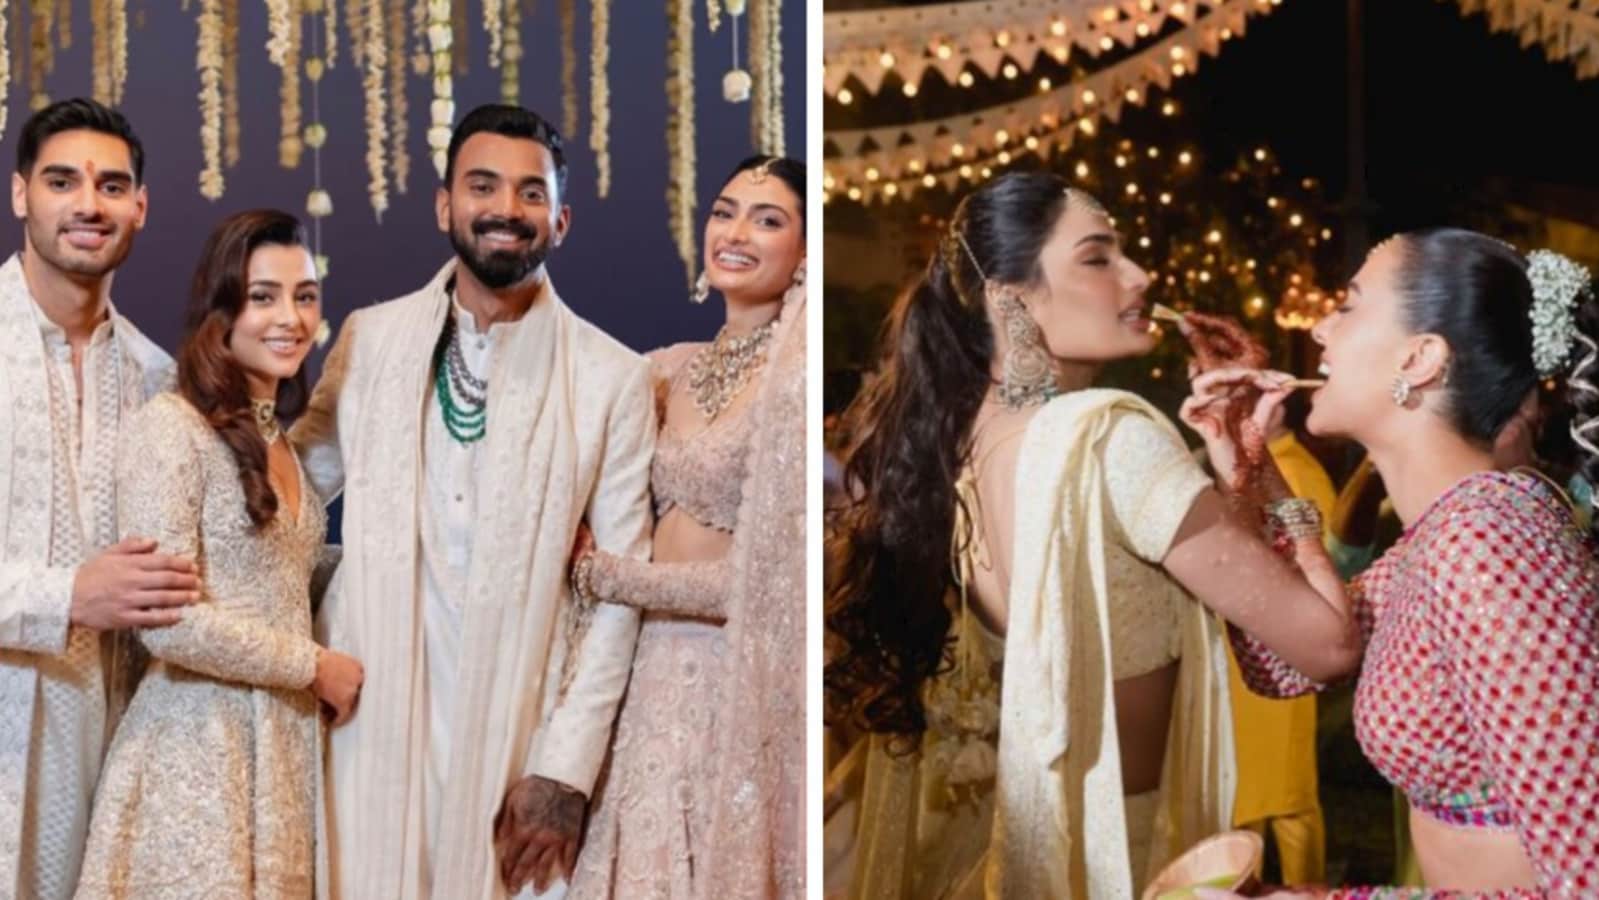 Athiya Shetty, KL Rahul pose with Ahan Shetty and his girlfriend Tania Shroff in unseen wedding ceremony pics